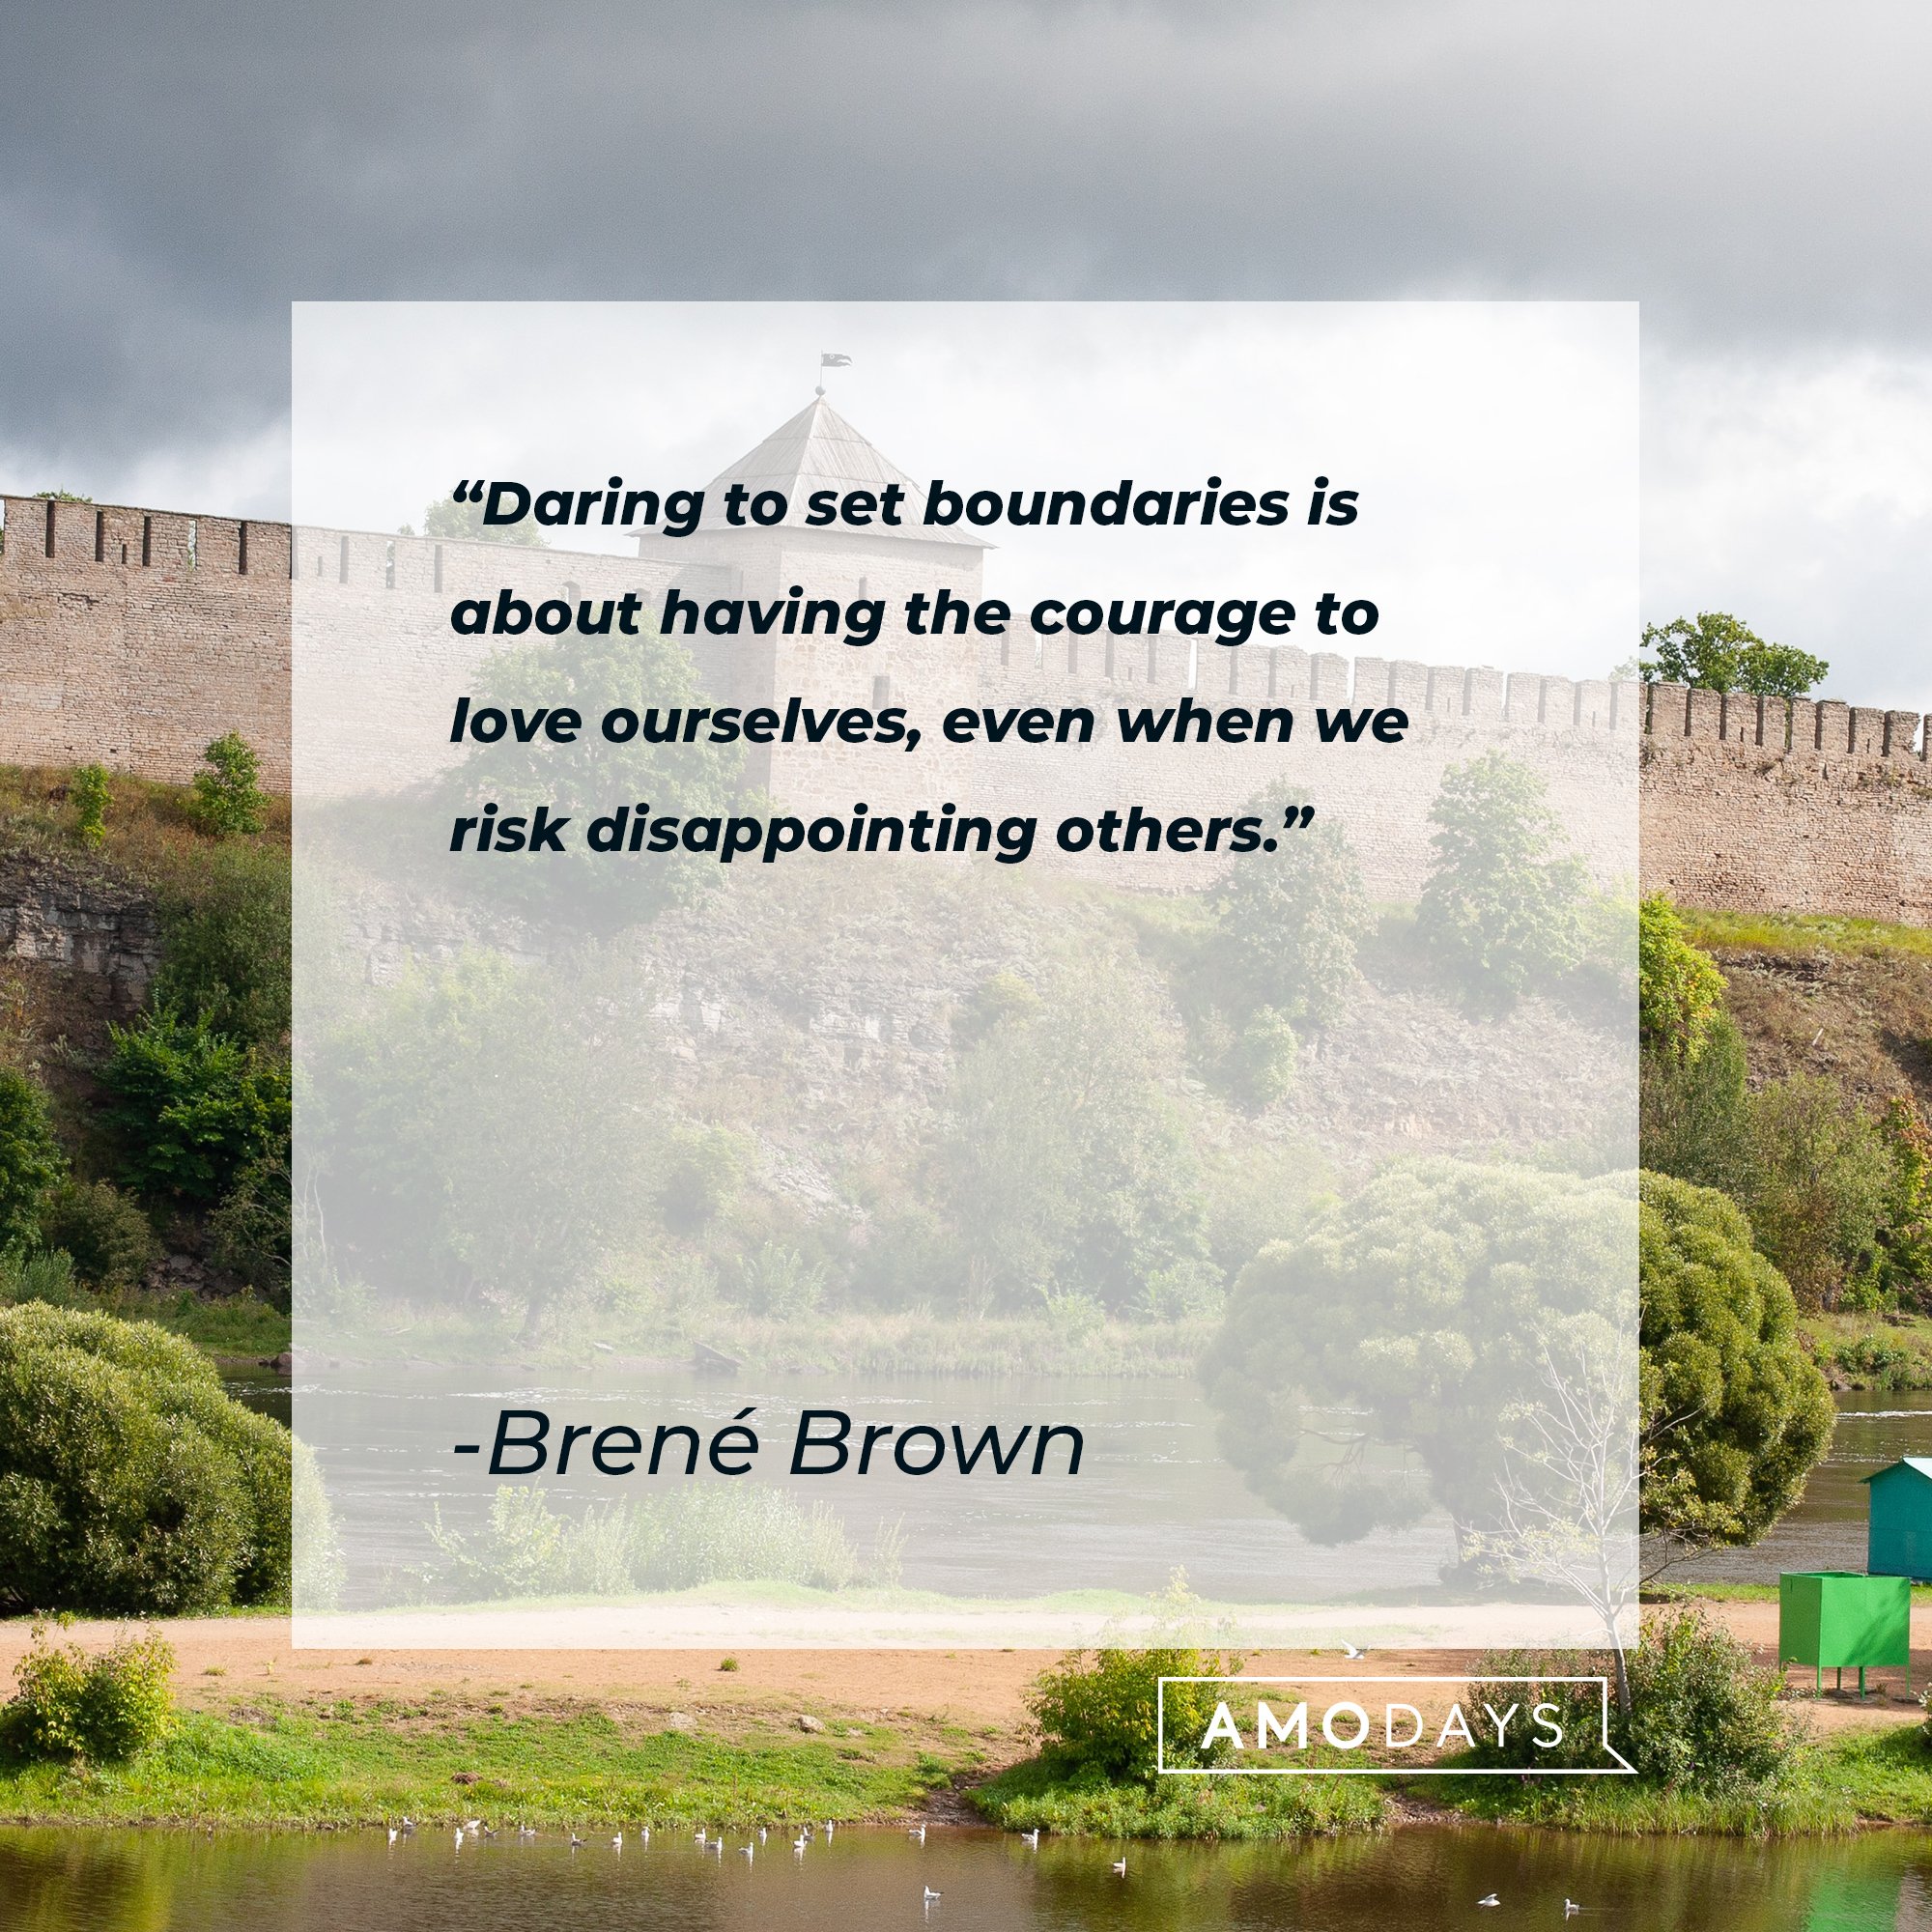 Brené Brown’s quote: "Daring to set boundaries is about having the courage to love ourselves, even when we risk disappointing others.” | Image: AmoDays